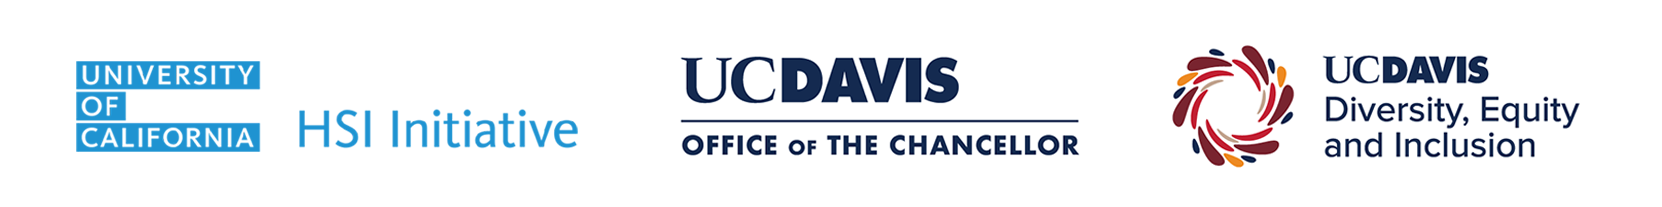 logos for UC Davis Office of Diversity, Equity and Inclusion, Office of the Chancellor and UC-HSI Initiative